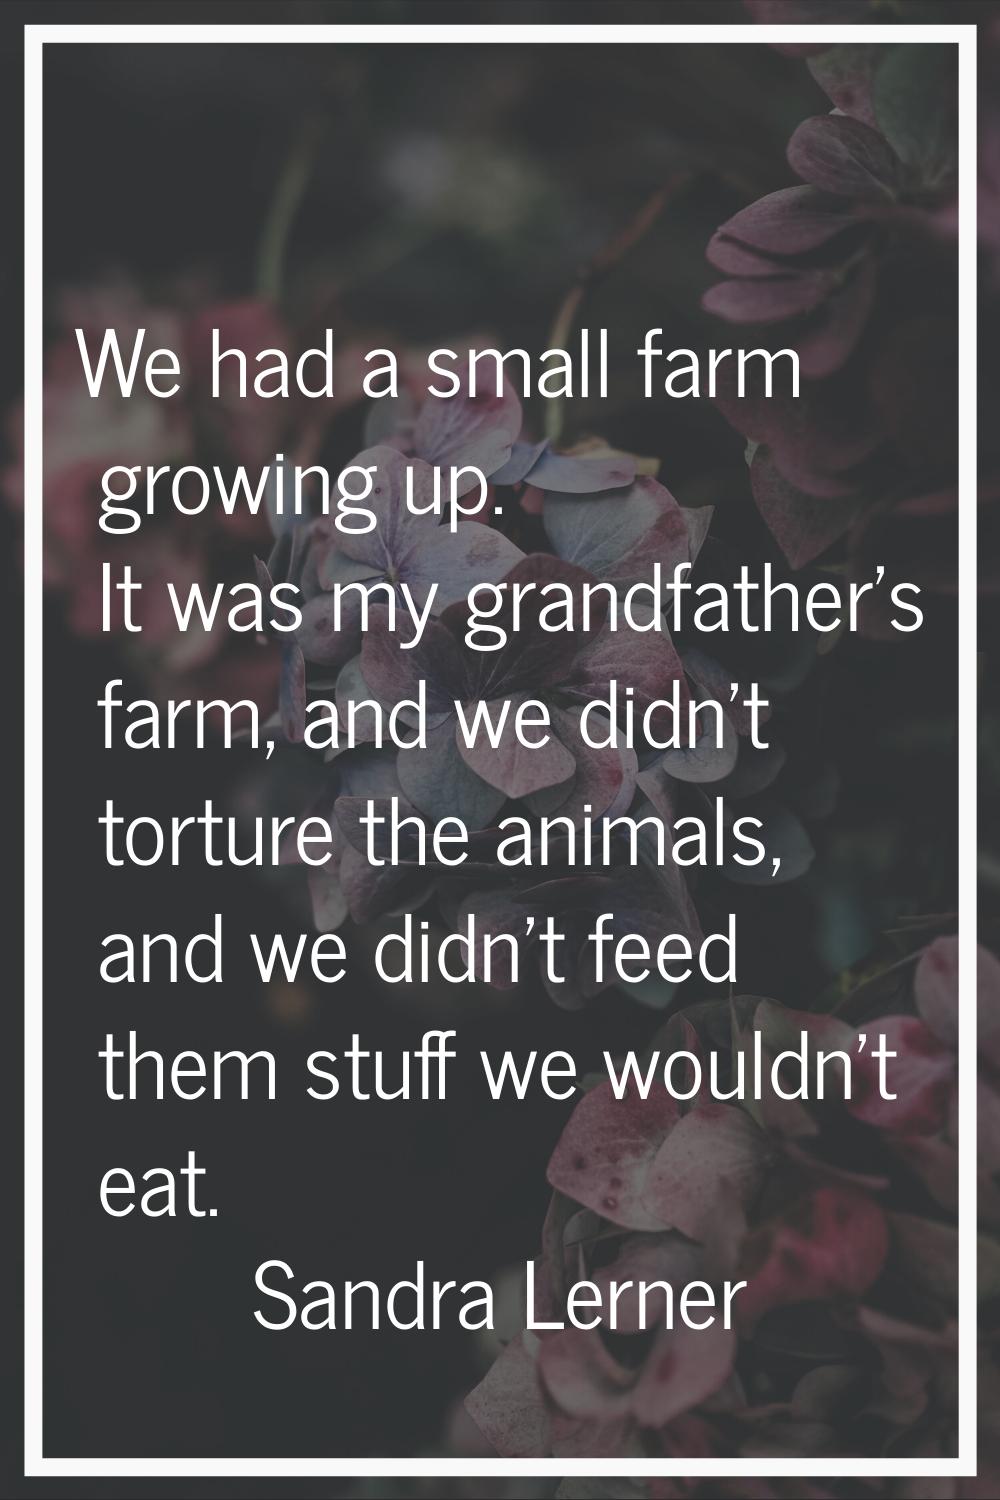 We had a small farm growing up. It was my grandfather's farm, and we didn't torture the animals, an